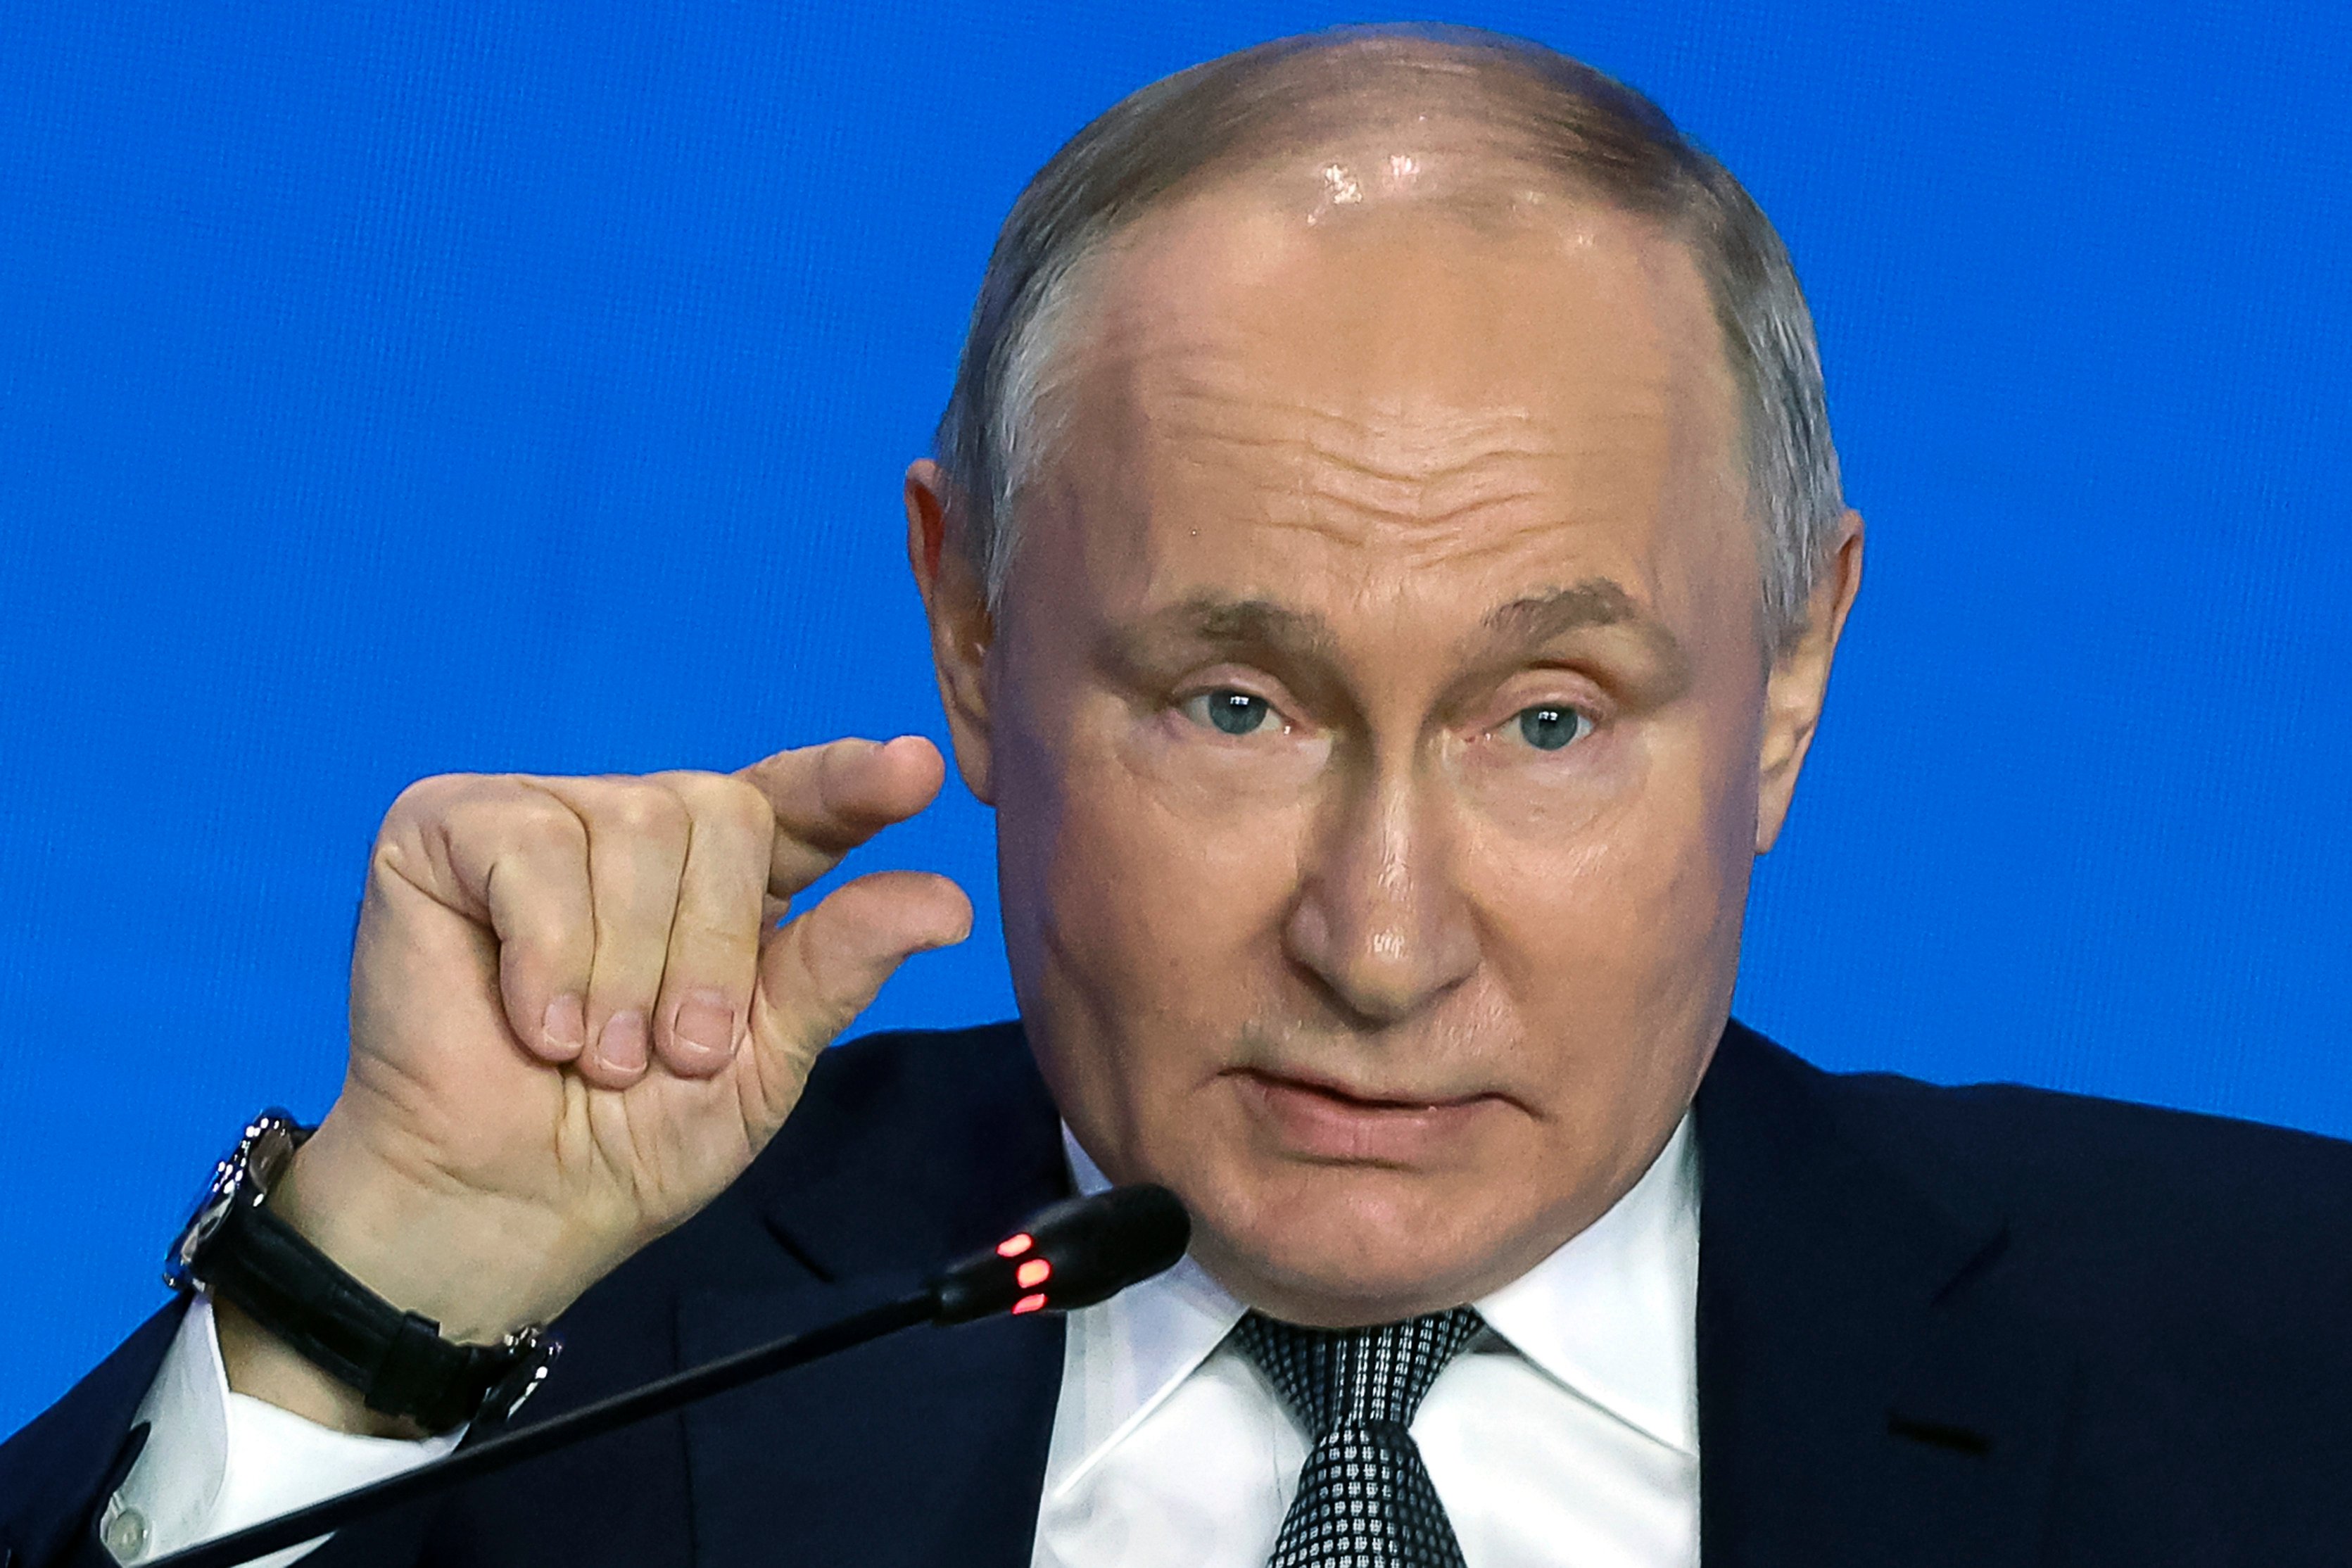 Russian President Vladimir Putin gestures as he speaks to scientists on the sidelines of the Future Technologies Forum in Moscow on Wednesday. Photo: Sputnik via AP